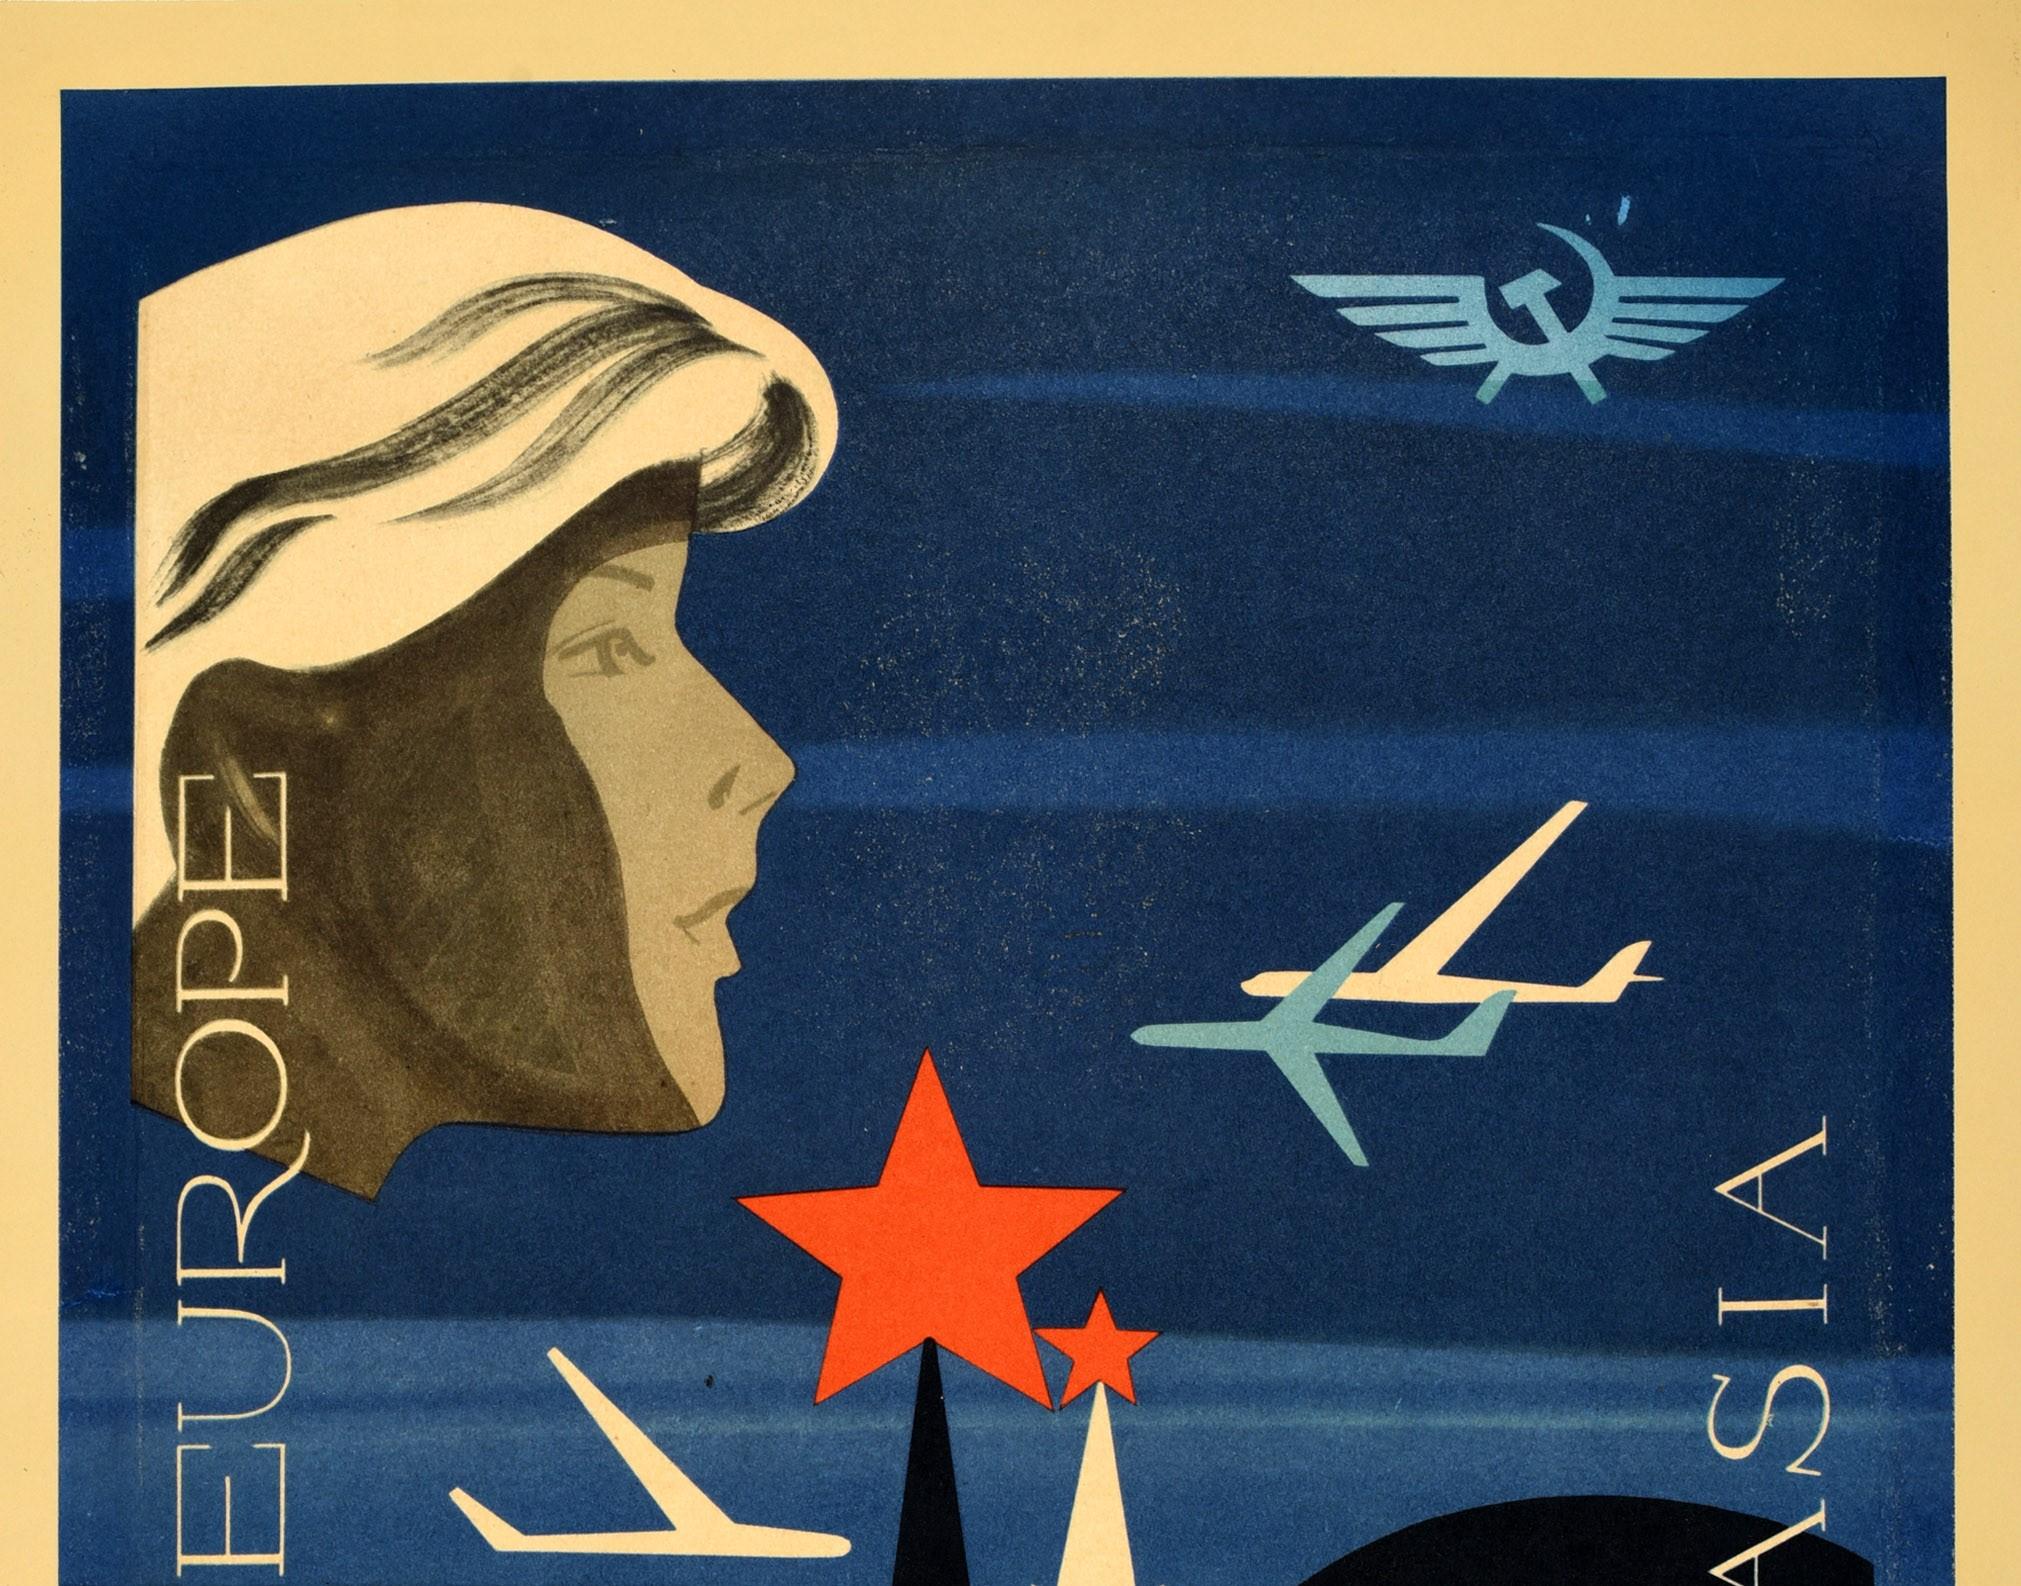 Original vintage travel poster - Fly by Aeroflot The Shortest Way from Europe to Asia via USSR - featuring a mid-century design depicting planes flying by stylised images of the historic Moscow Kremlin towers topped by red stars in the centre, the